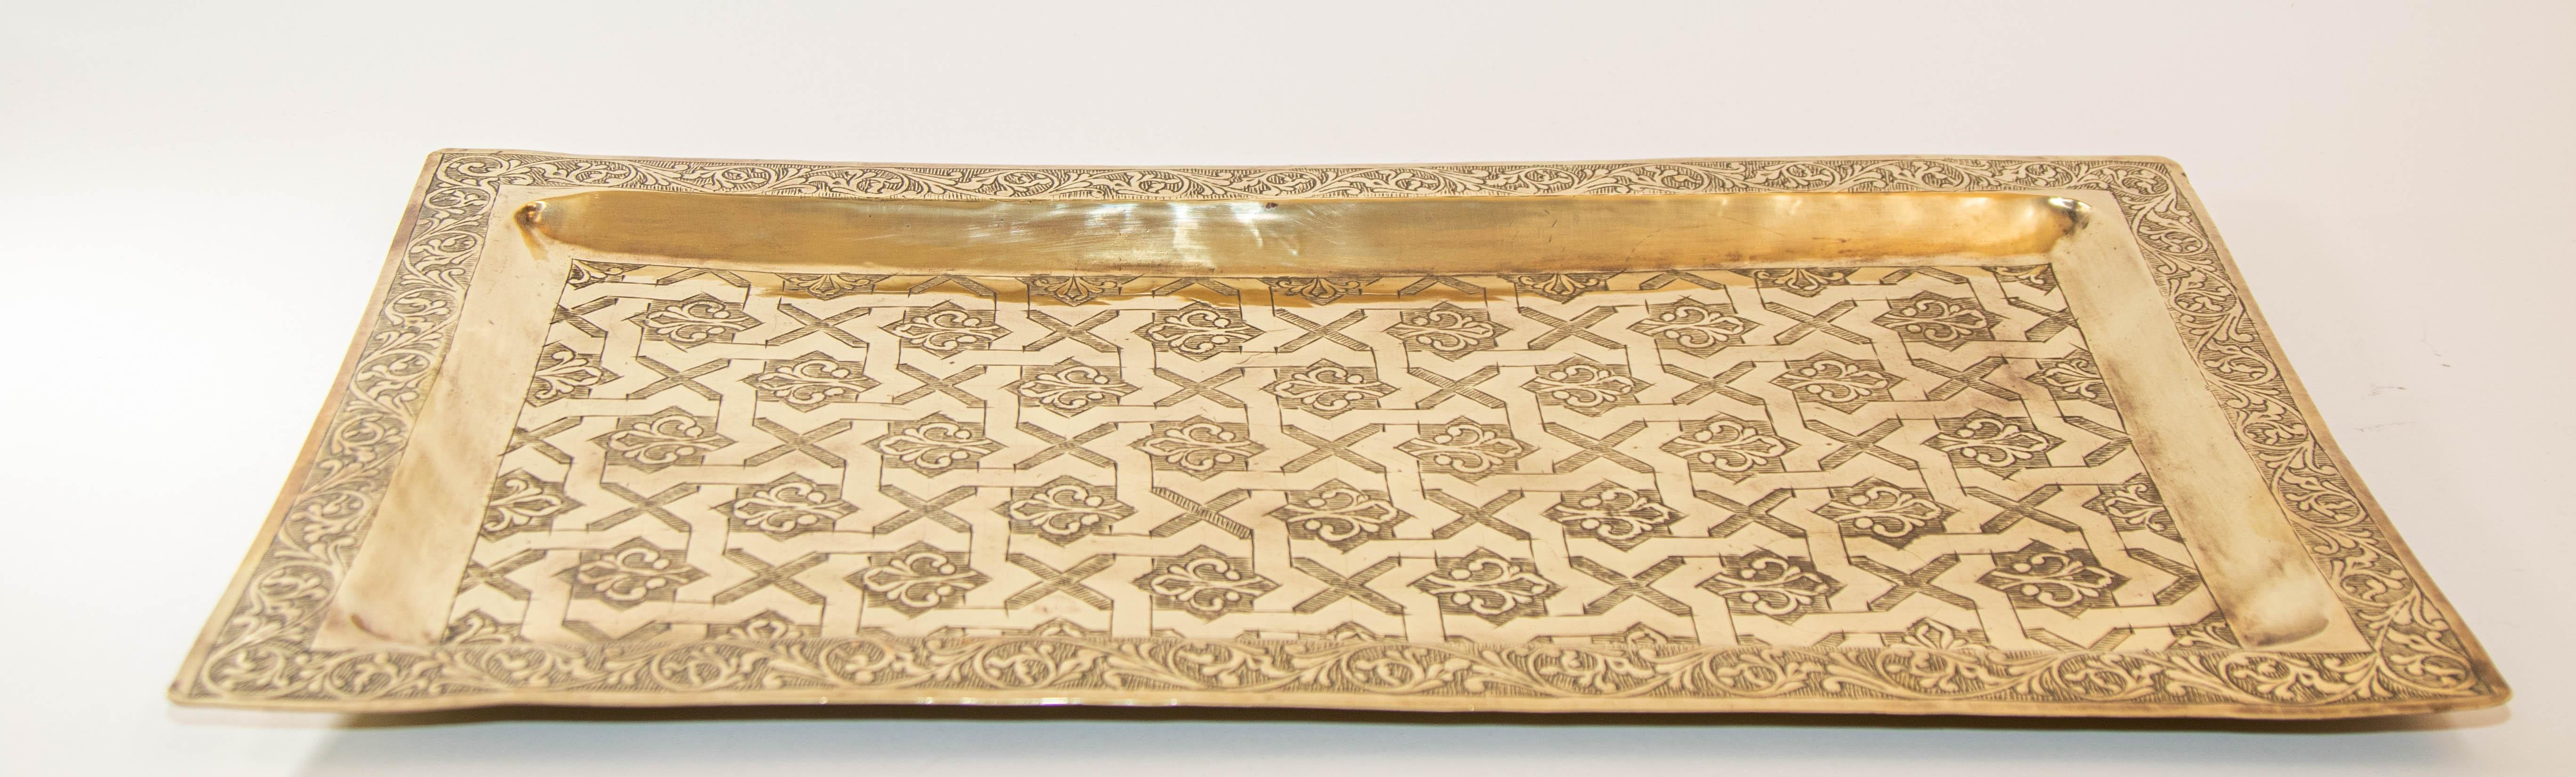 1940s Moroccan Brass Tray Rectangular Shape Polished Gold Brass Serving Platter For Sale 5